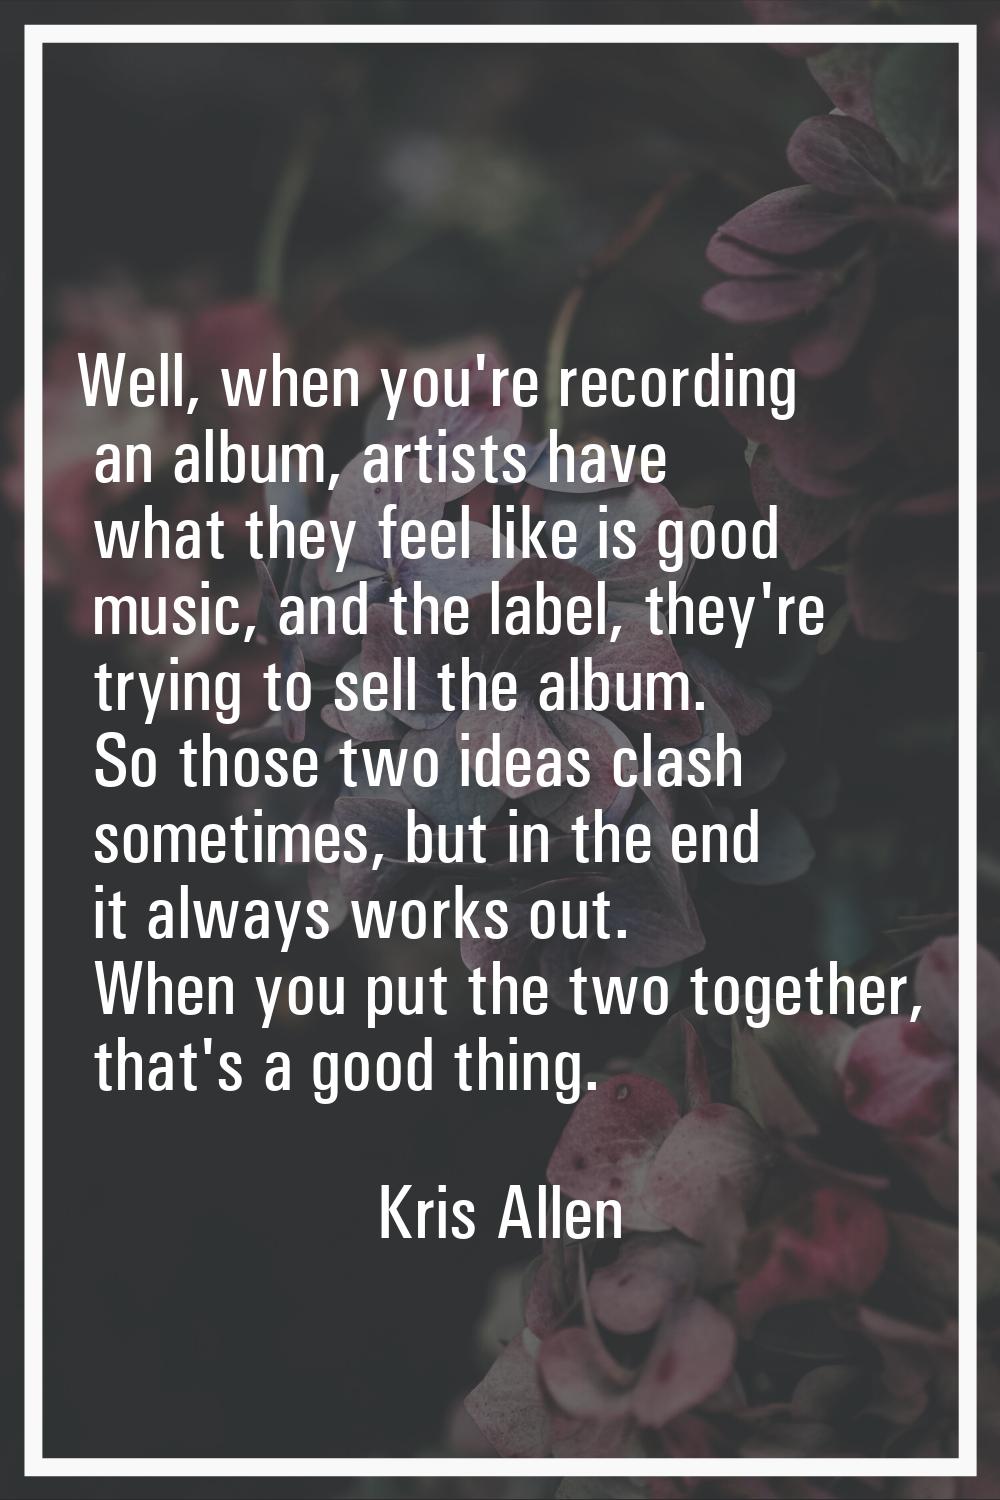 Well, when you're recording an album, artists have what they feel like is good music, and the label